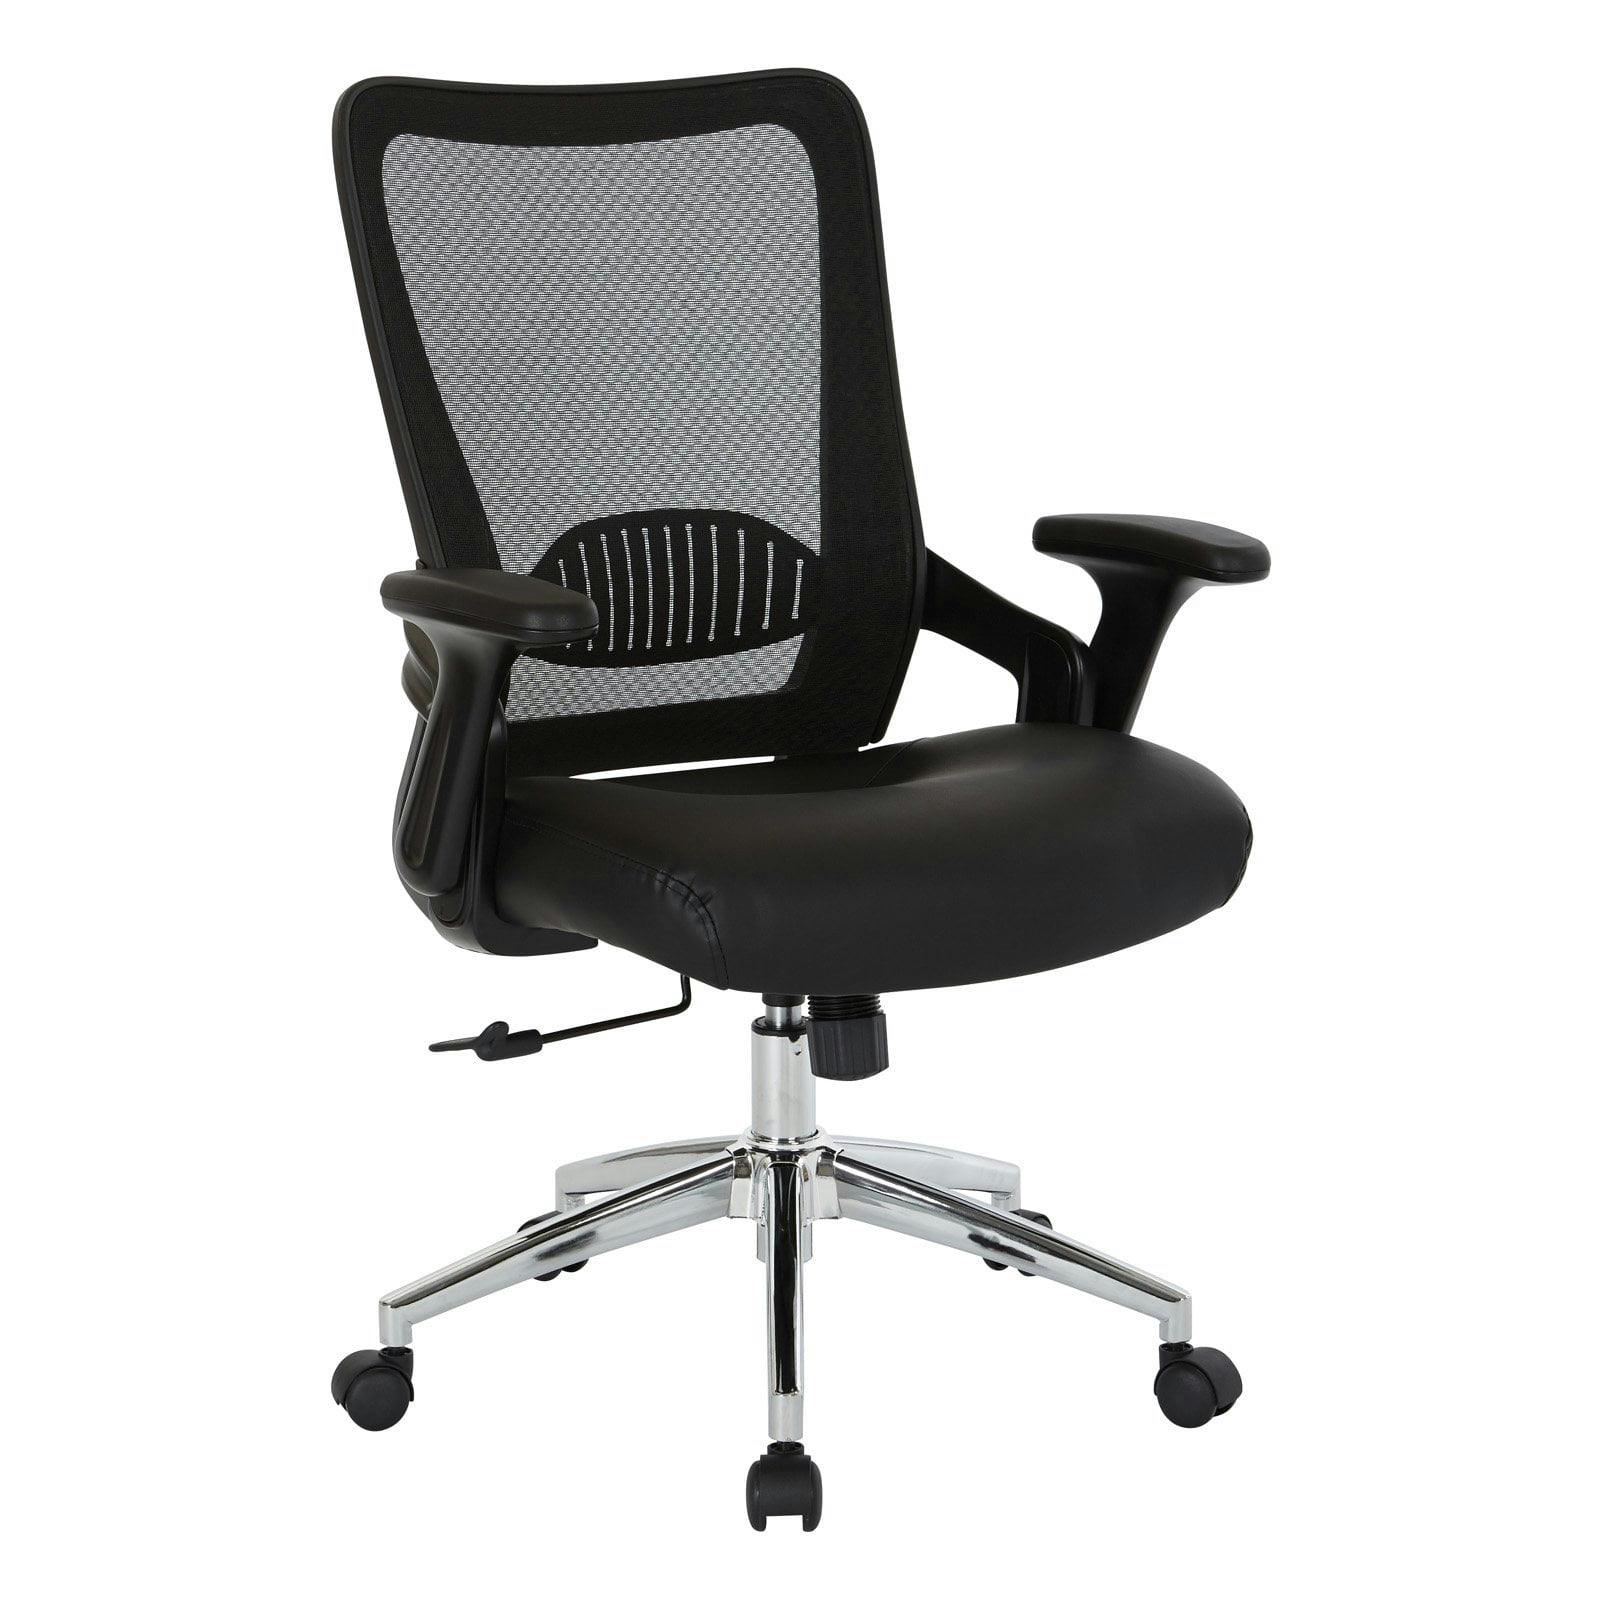 Modern Executive Black Mesh and Leather Swivel Office Chair with Chrome Base